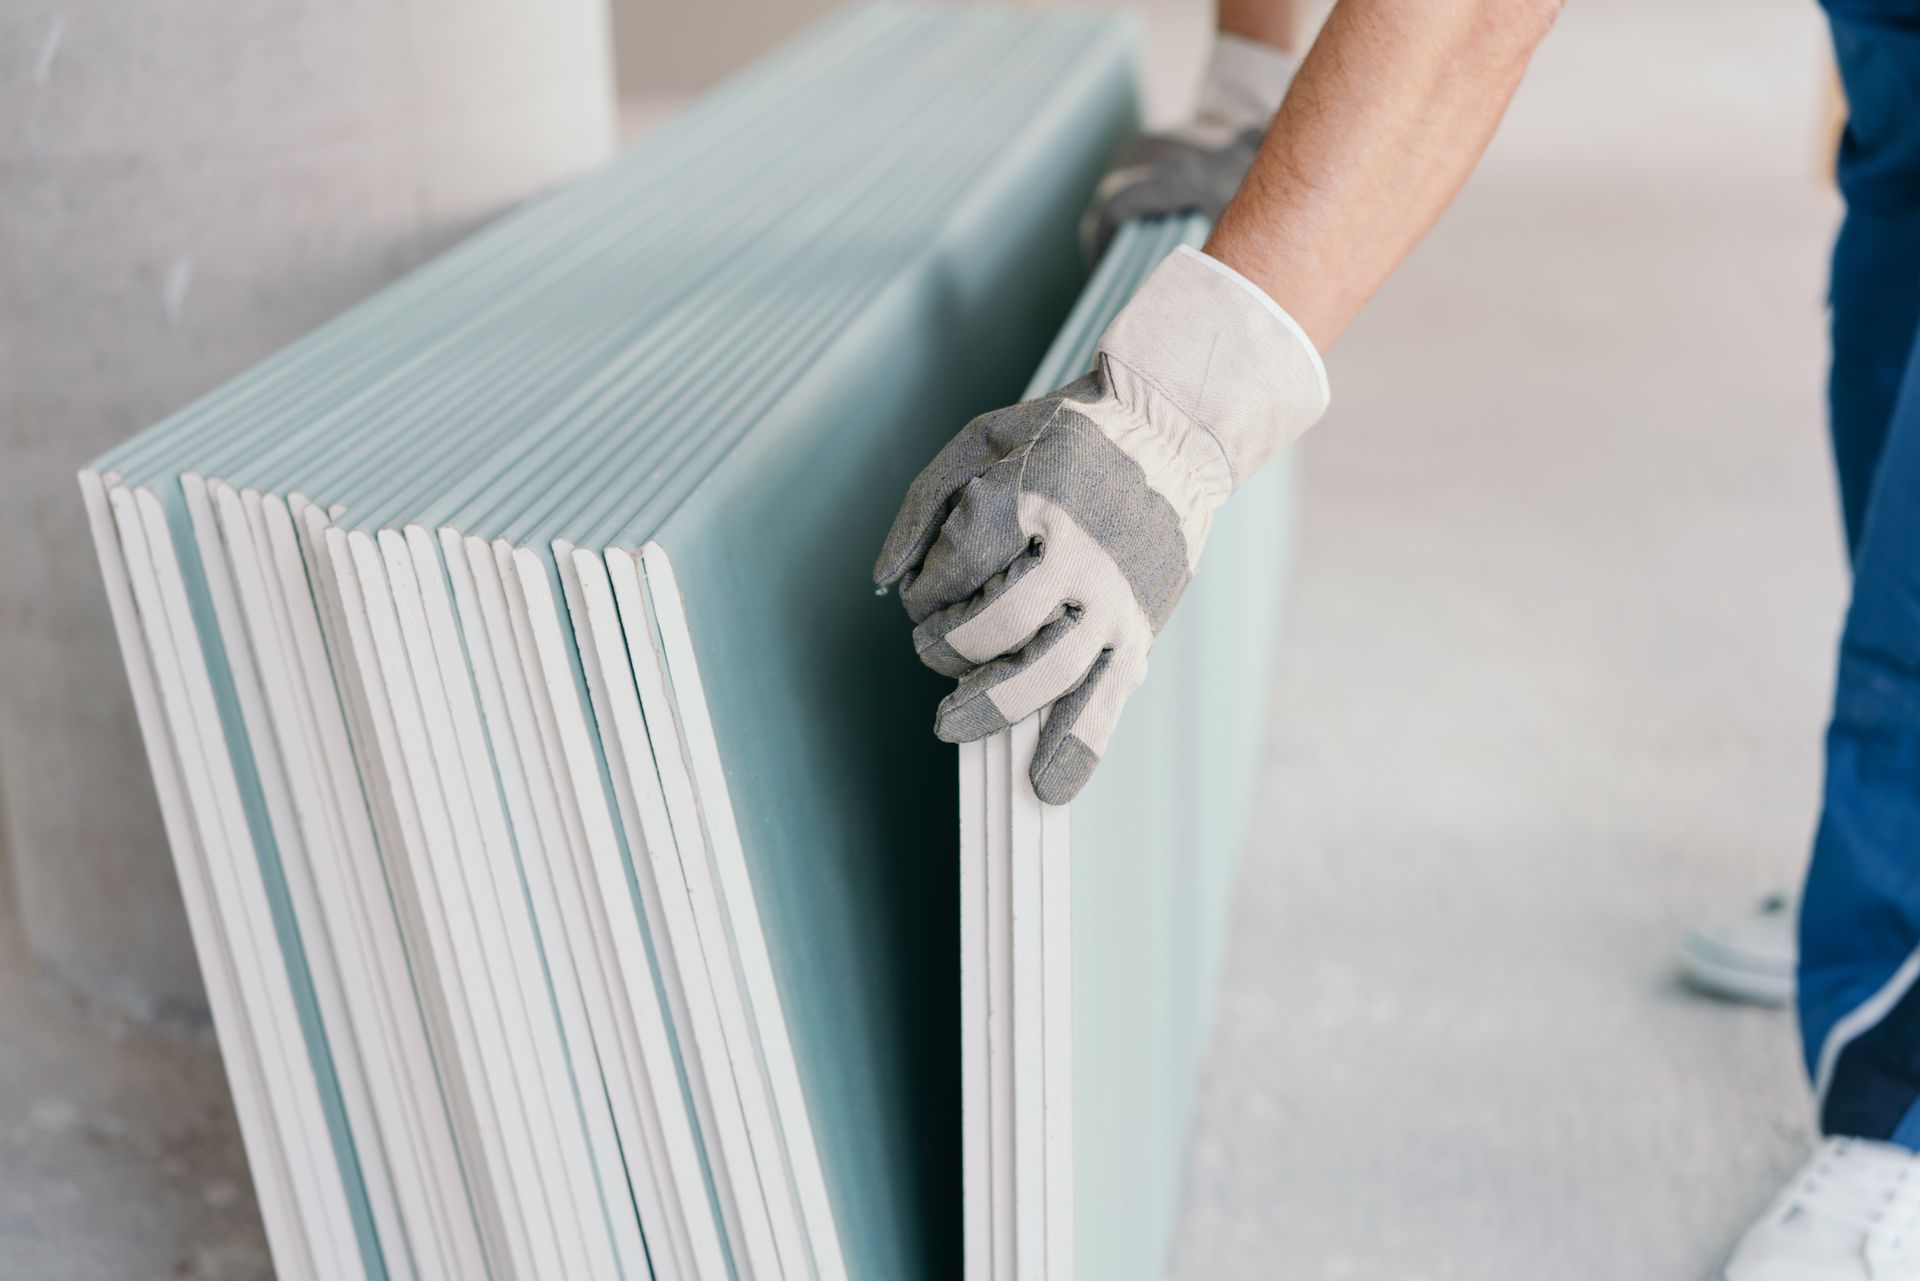 A person wearing gloves is holding a stack of drywall.